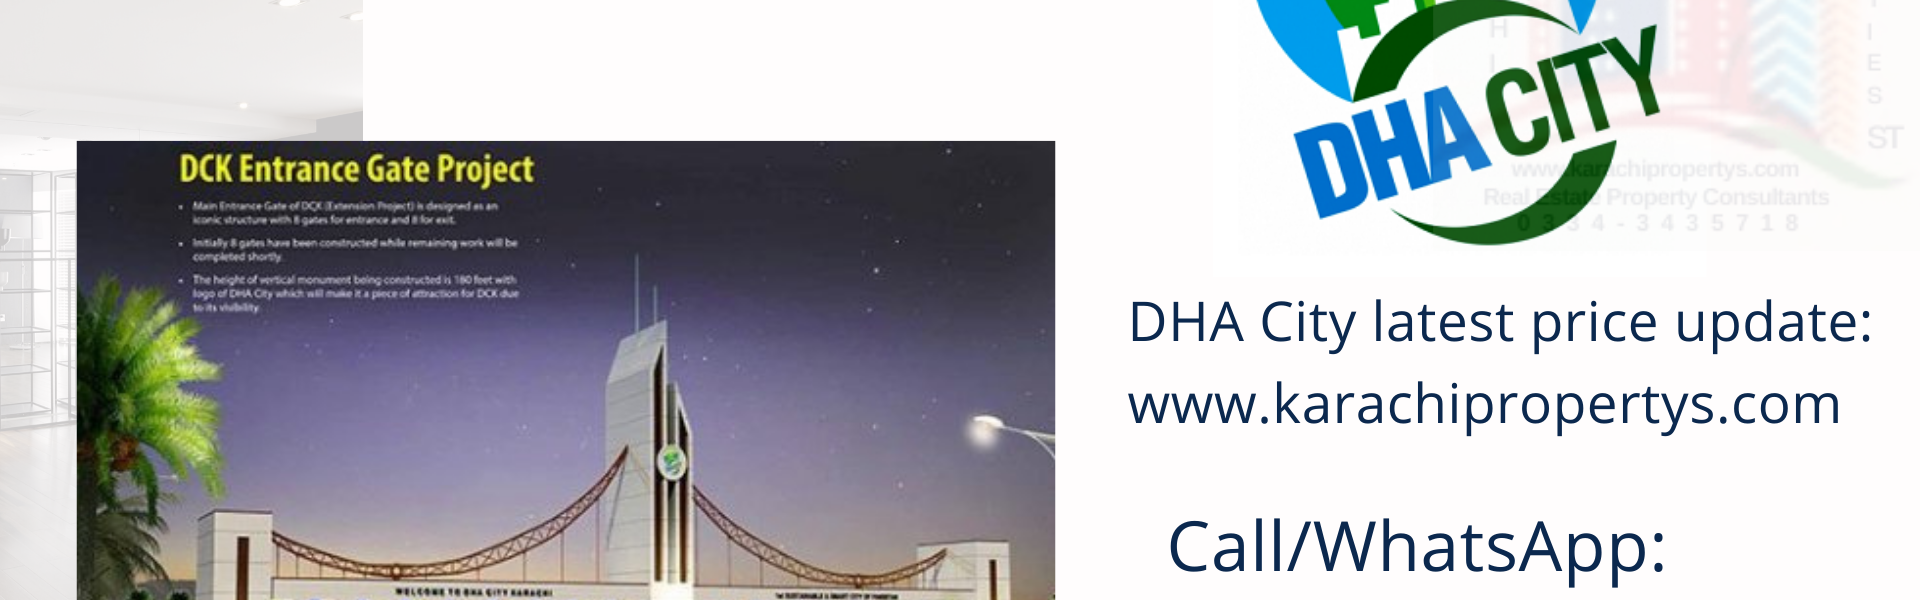 https://karachipropertys.com/dha-city-karachi-latest-plot-price-dha-city-daily-rates-update-dha-city-today-rates-its-all-about-dha-city/